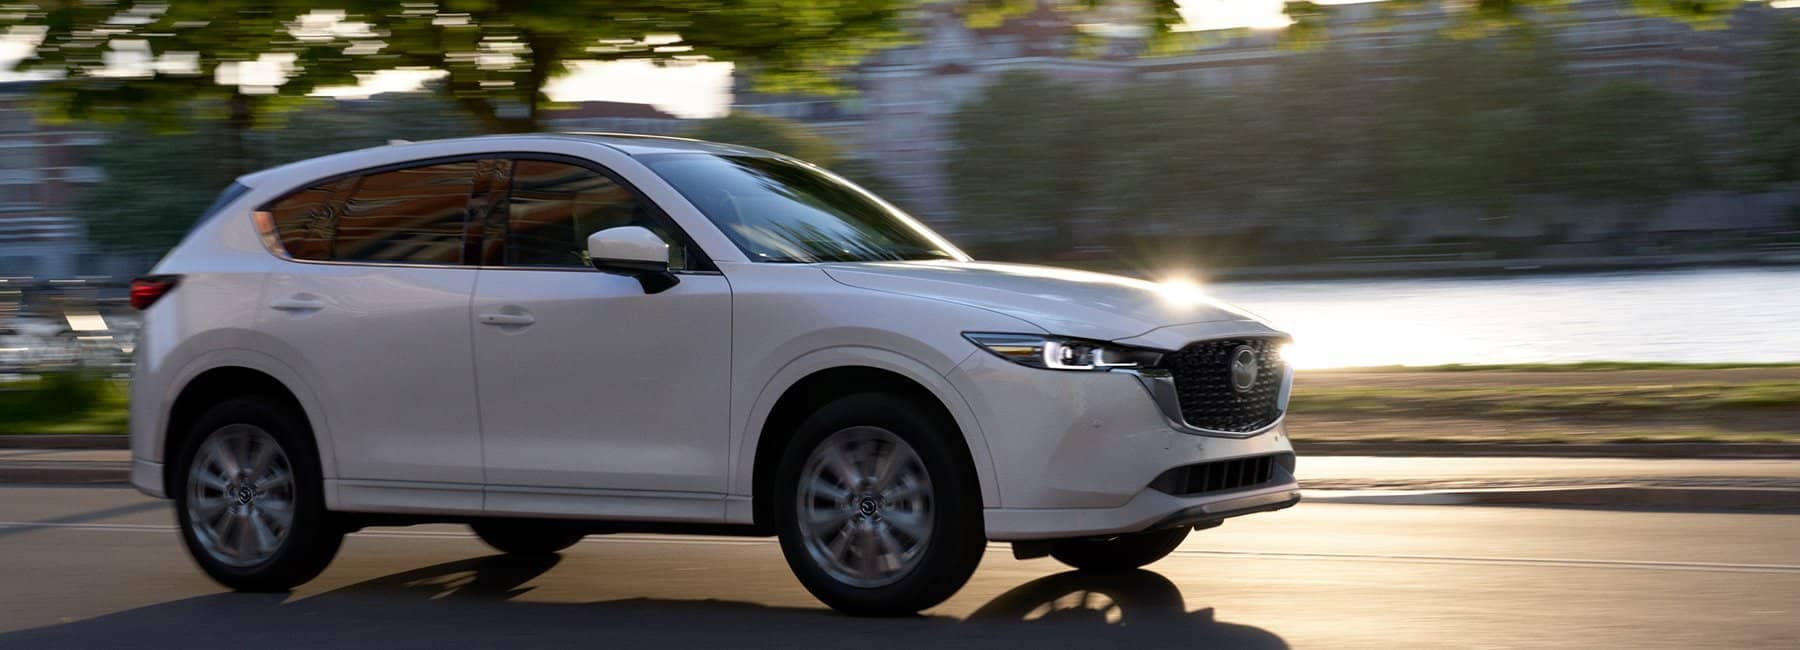 2022-mazda-cx-5-compact-suv-sideview-driving-blurred-trees-lake-white